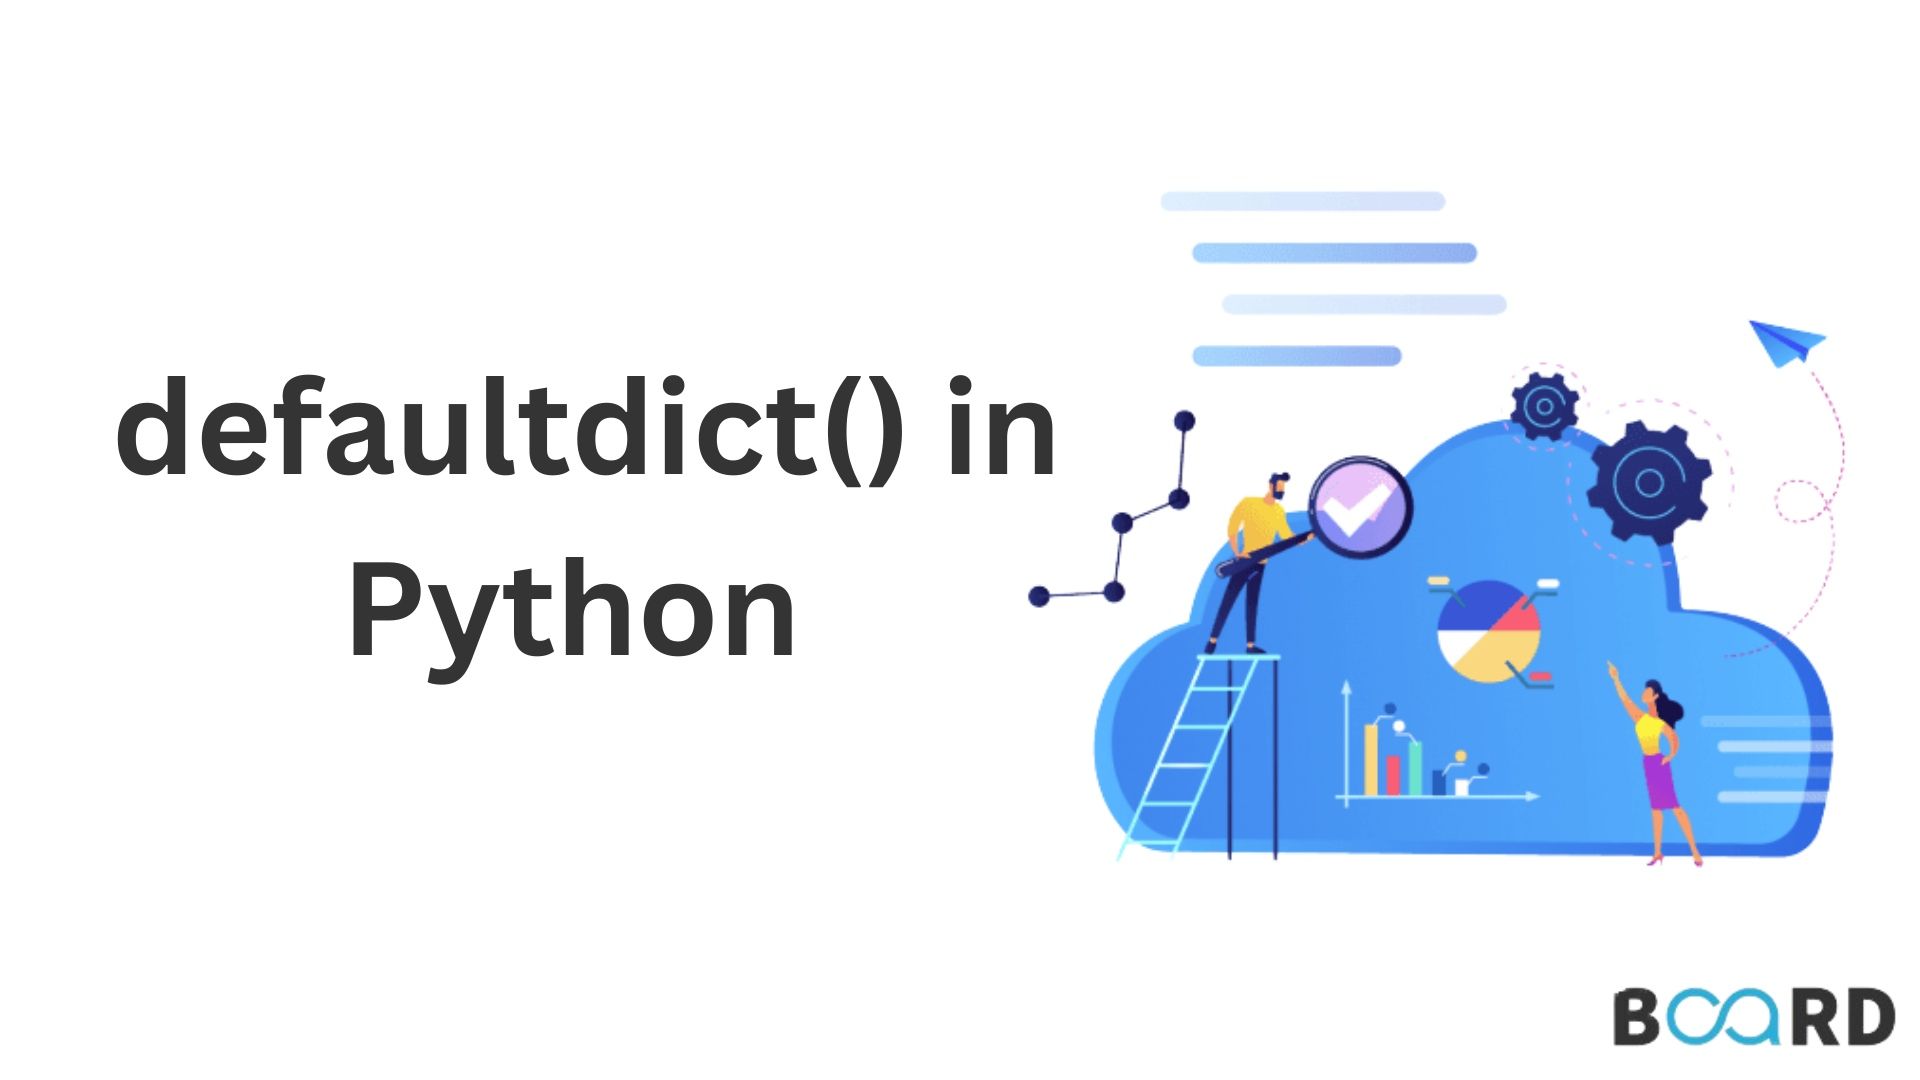 What are defaultdict in Python?